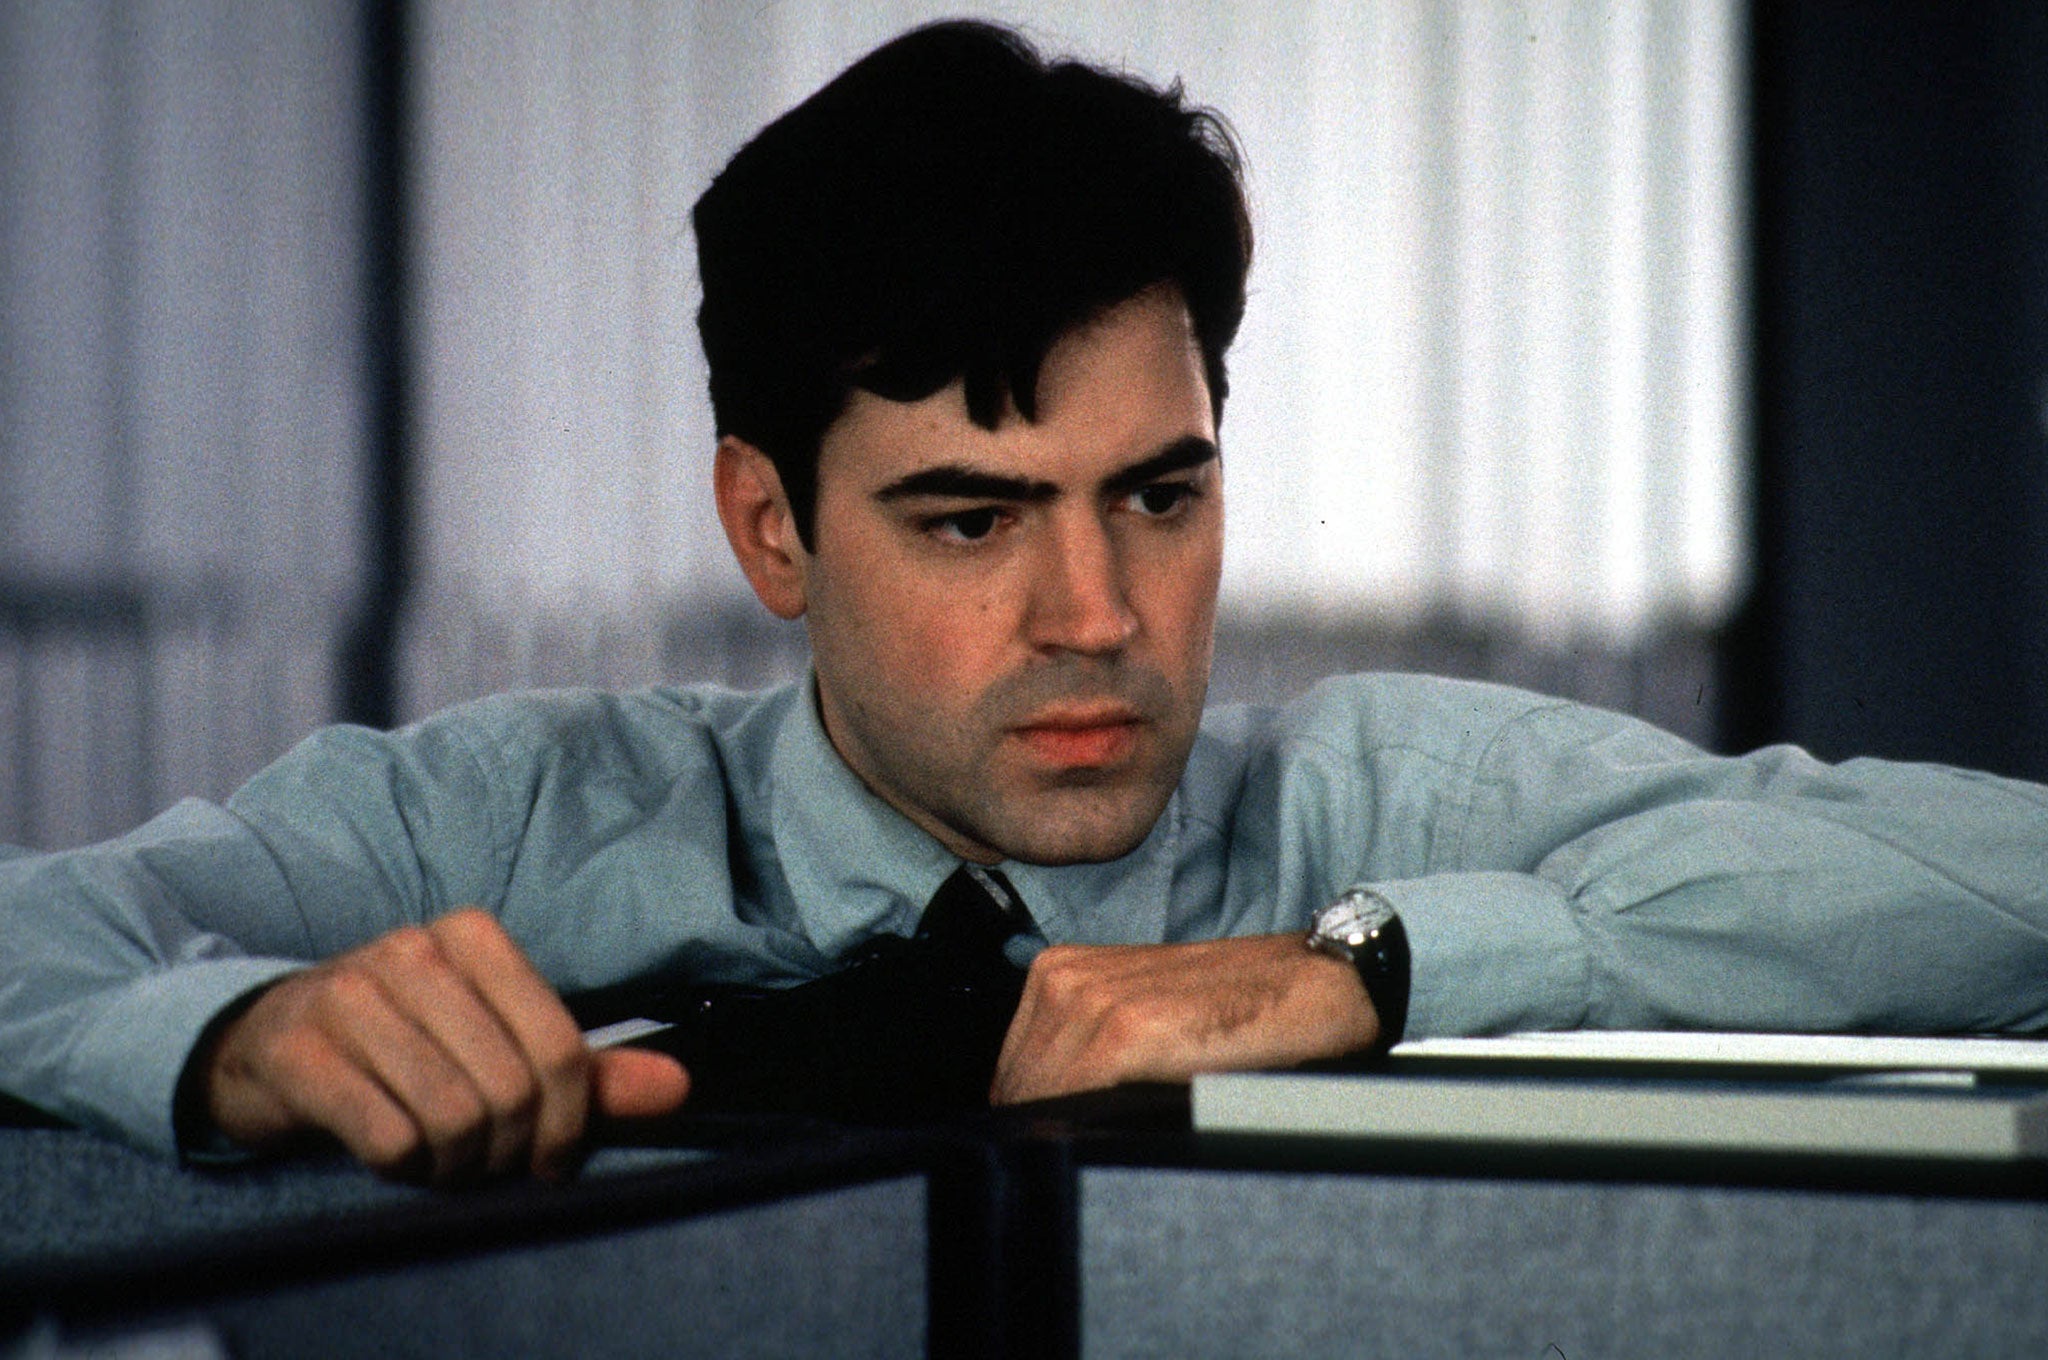 Ron Livingston in the film Office Space